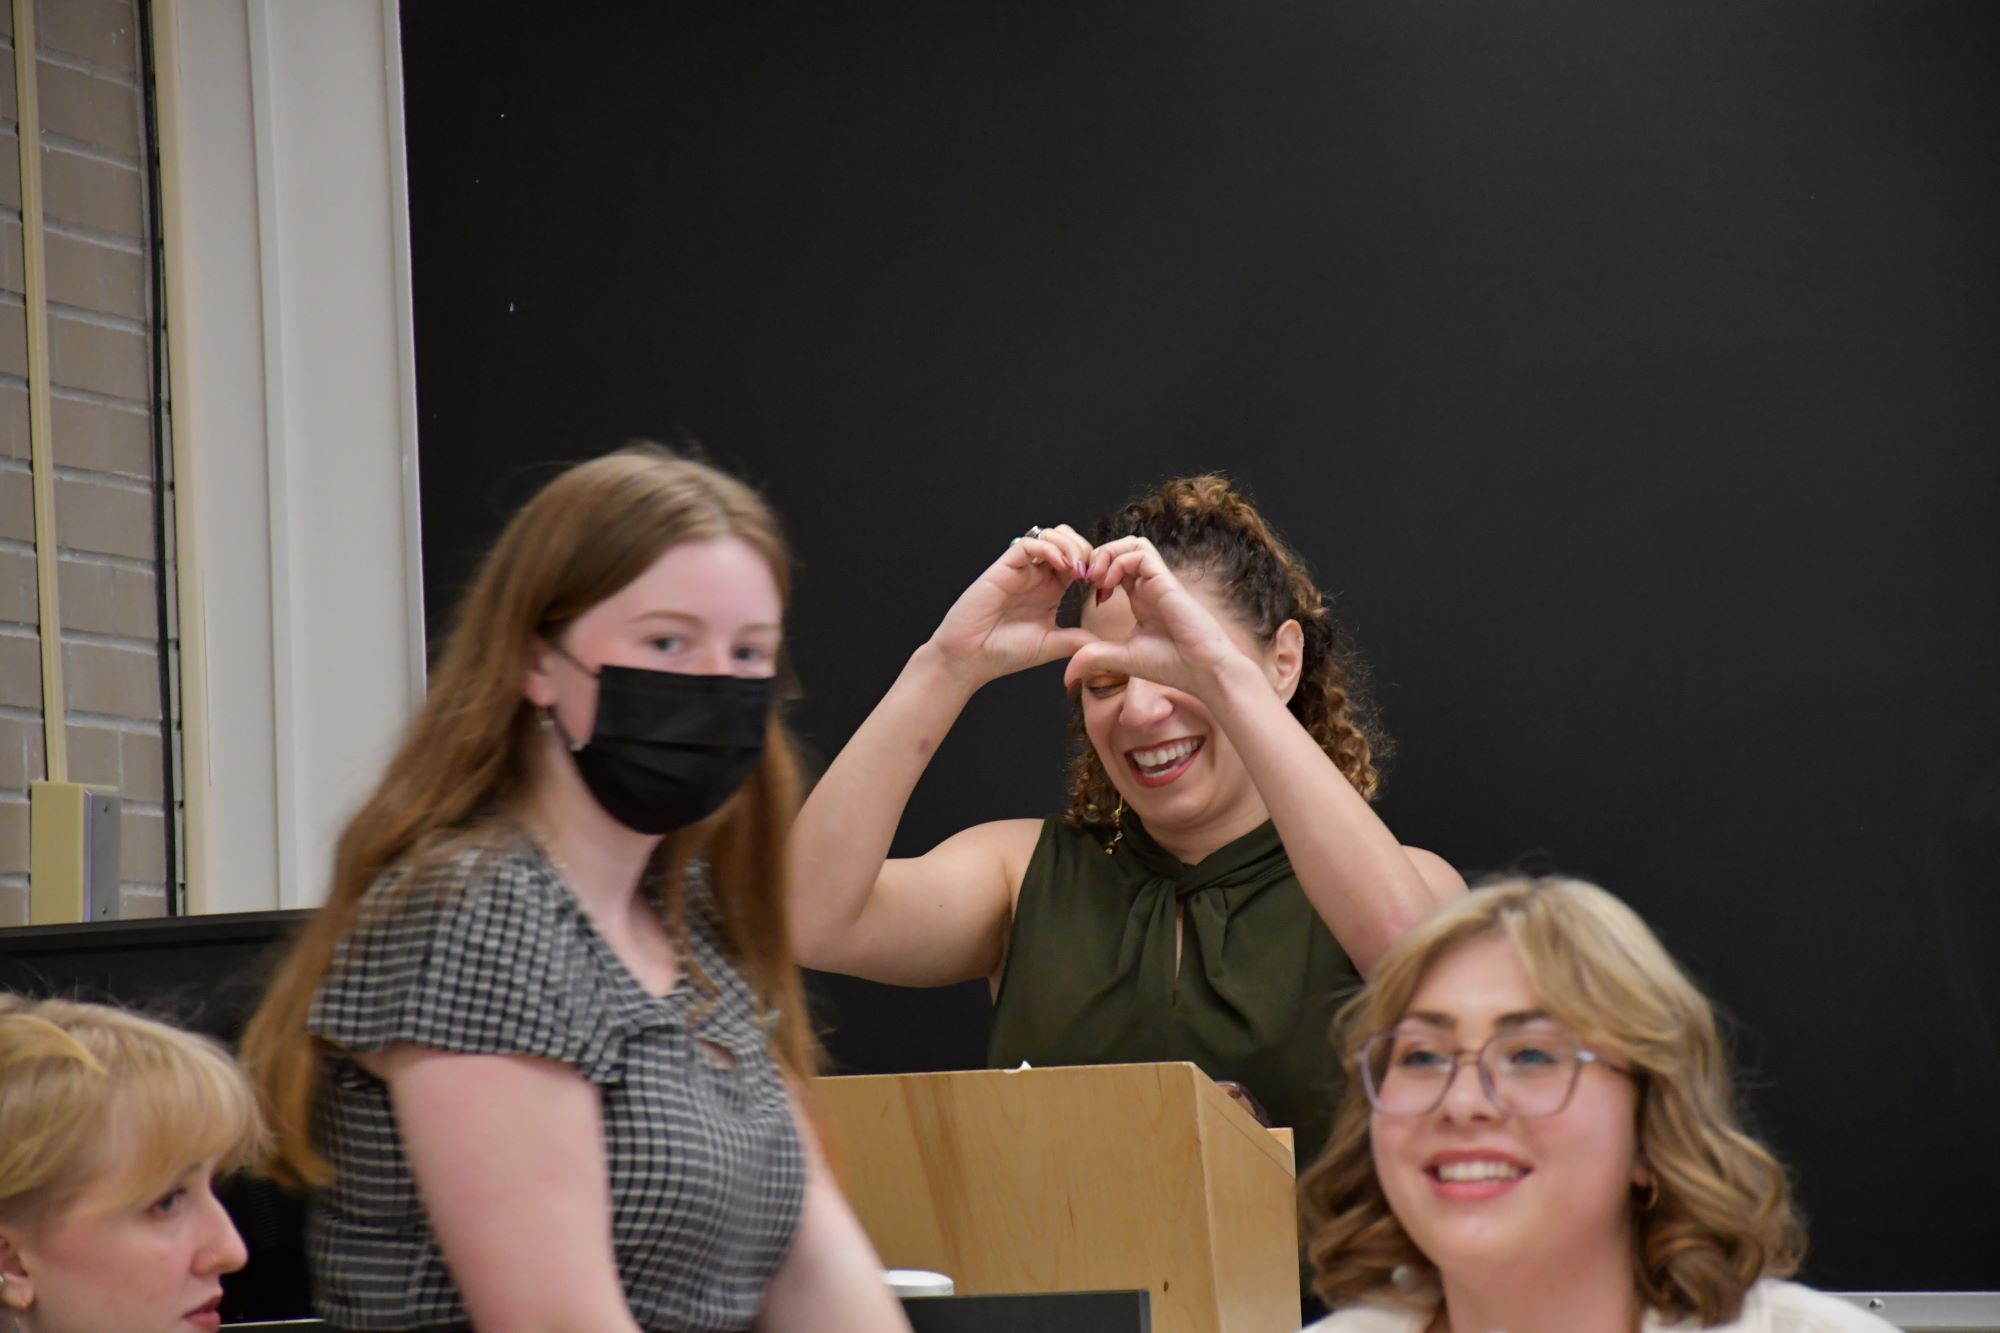 Salem making a heart shape with their hands while presenting